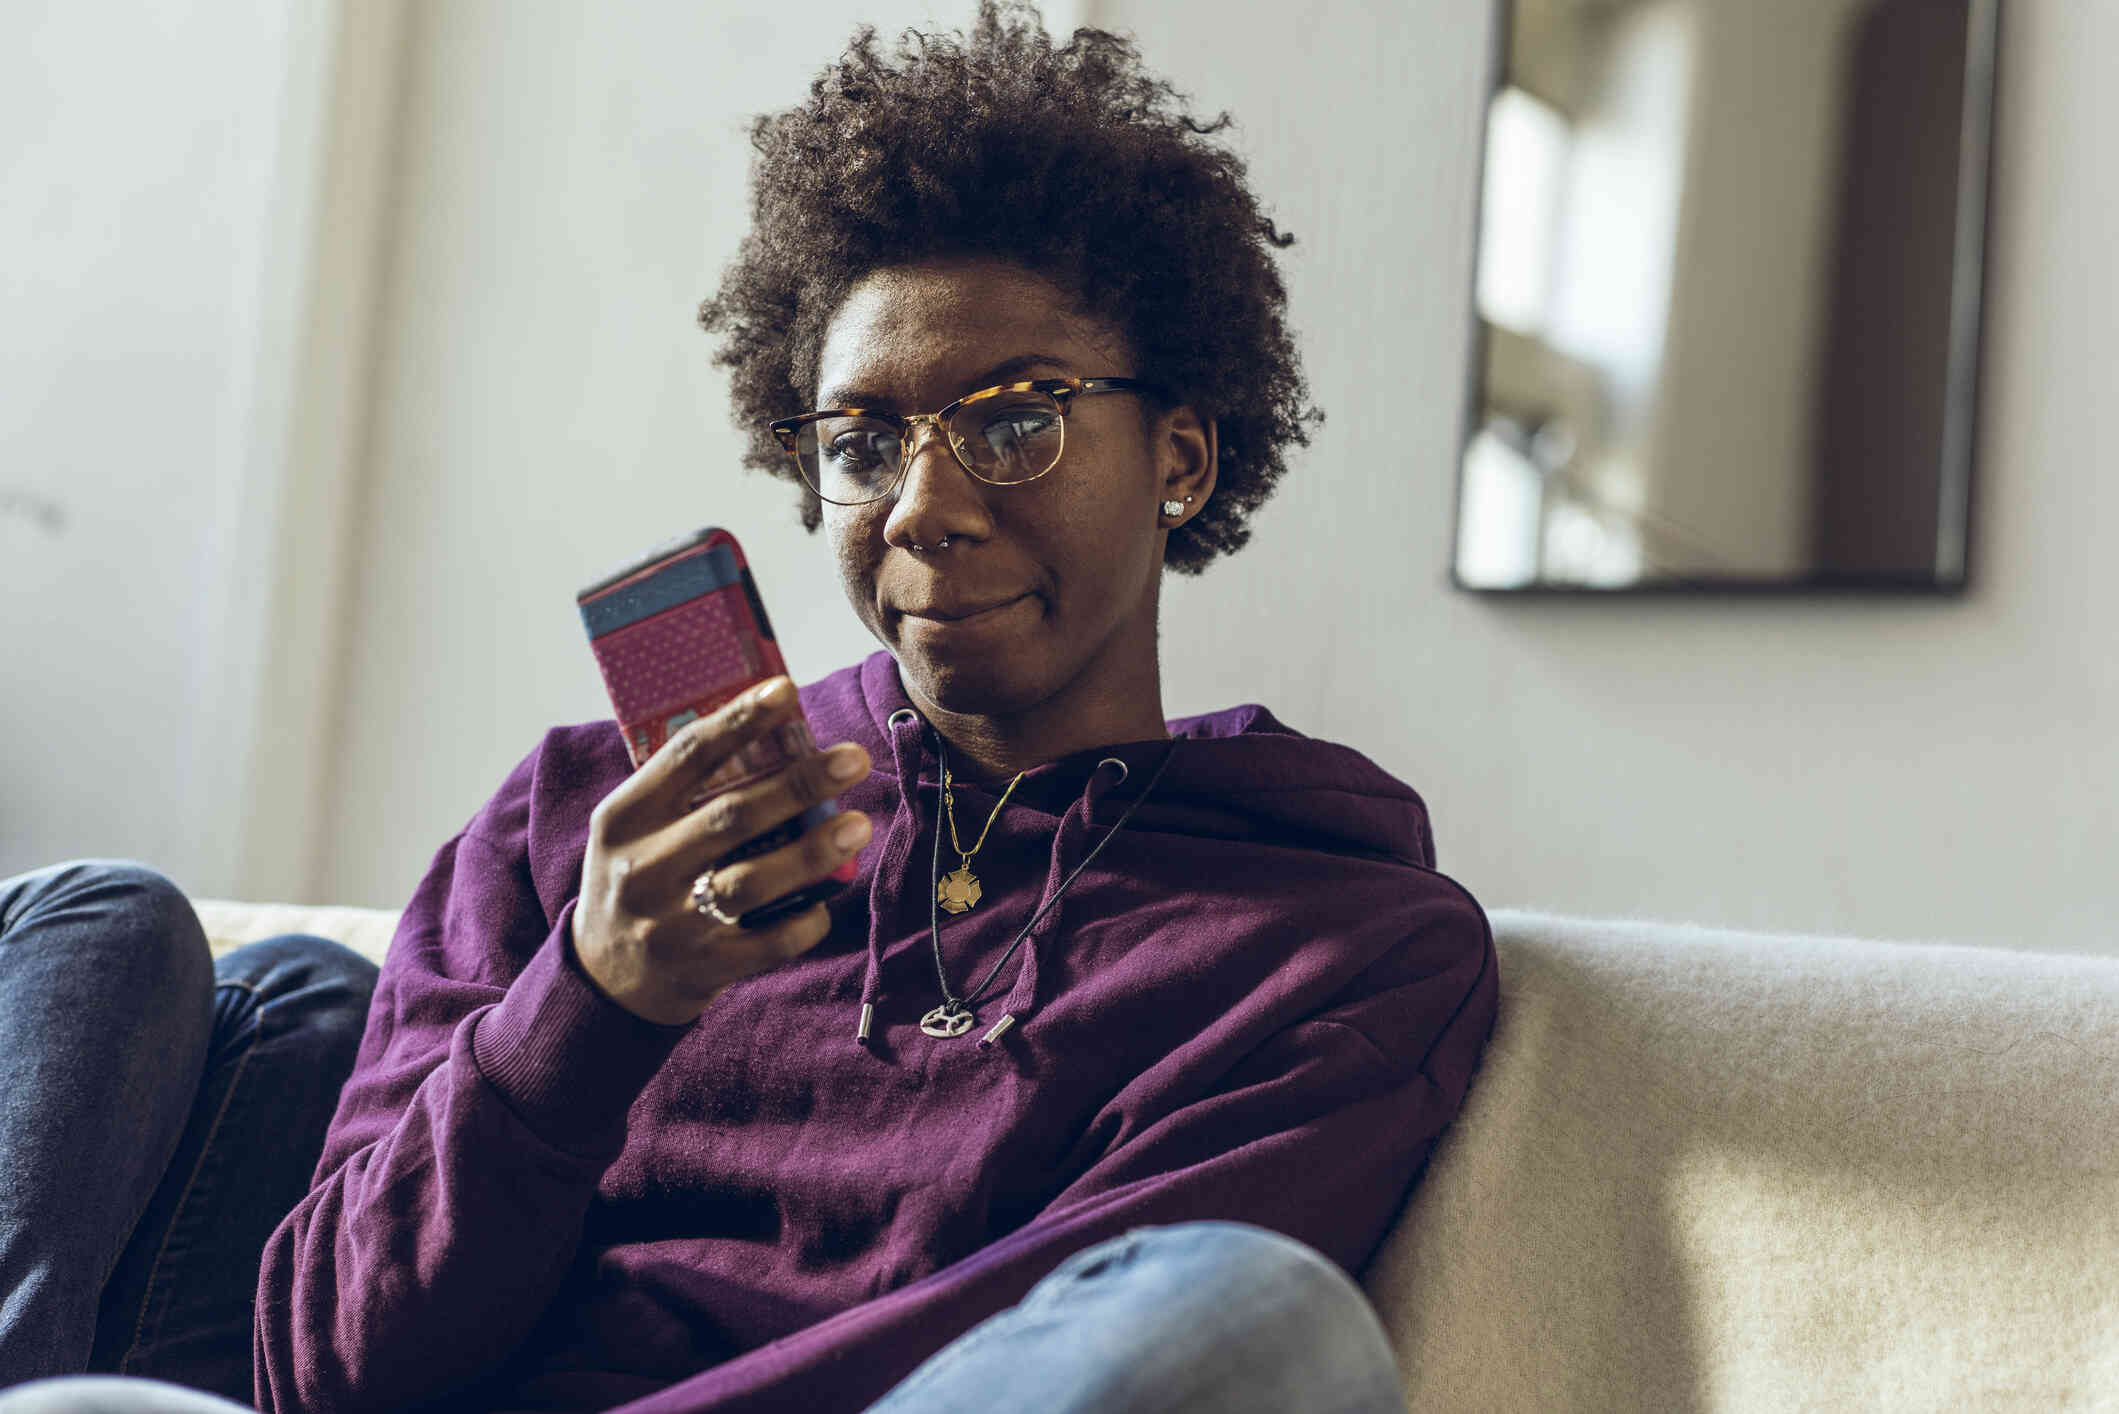 A woman in a purple sweater sits on the couch and looks at the cellphone in her hand.